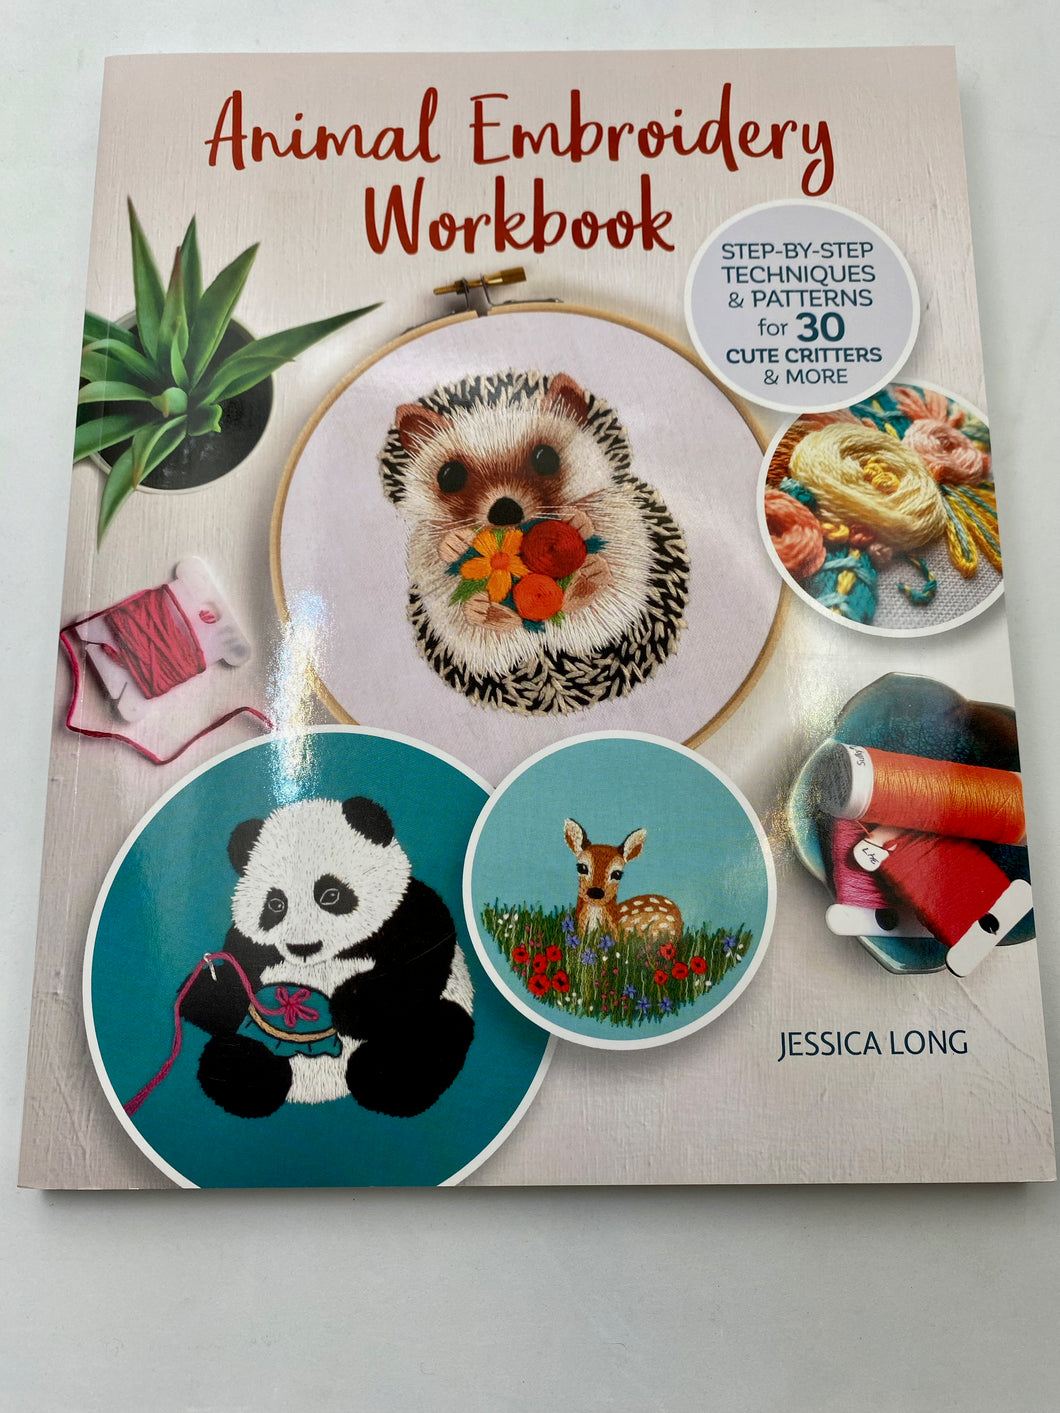 Animal Embroidery Workbook by Jessica Long